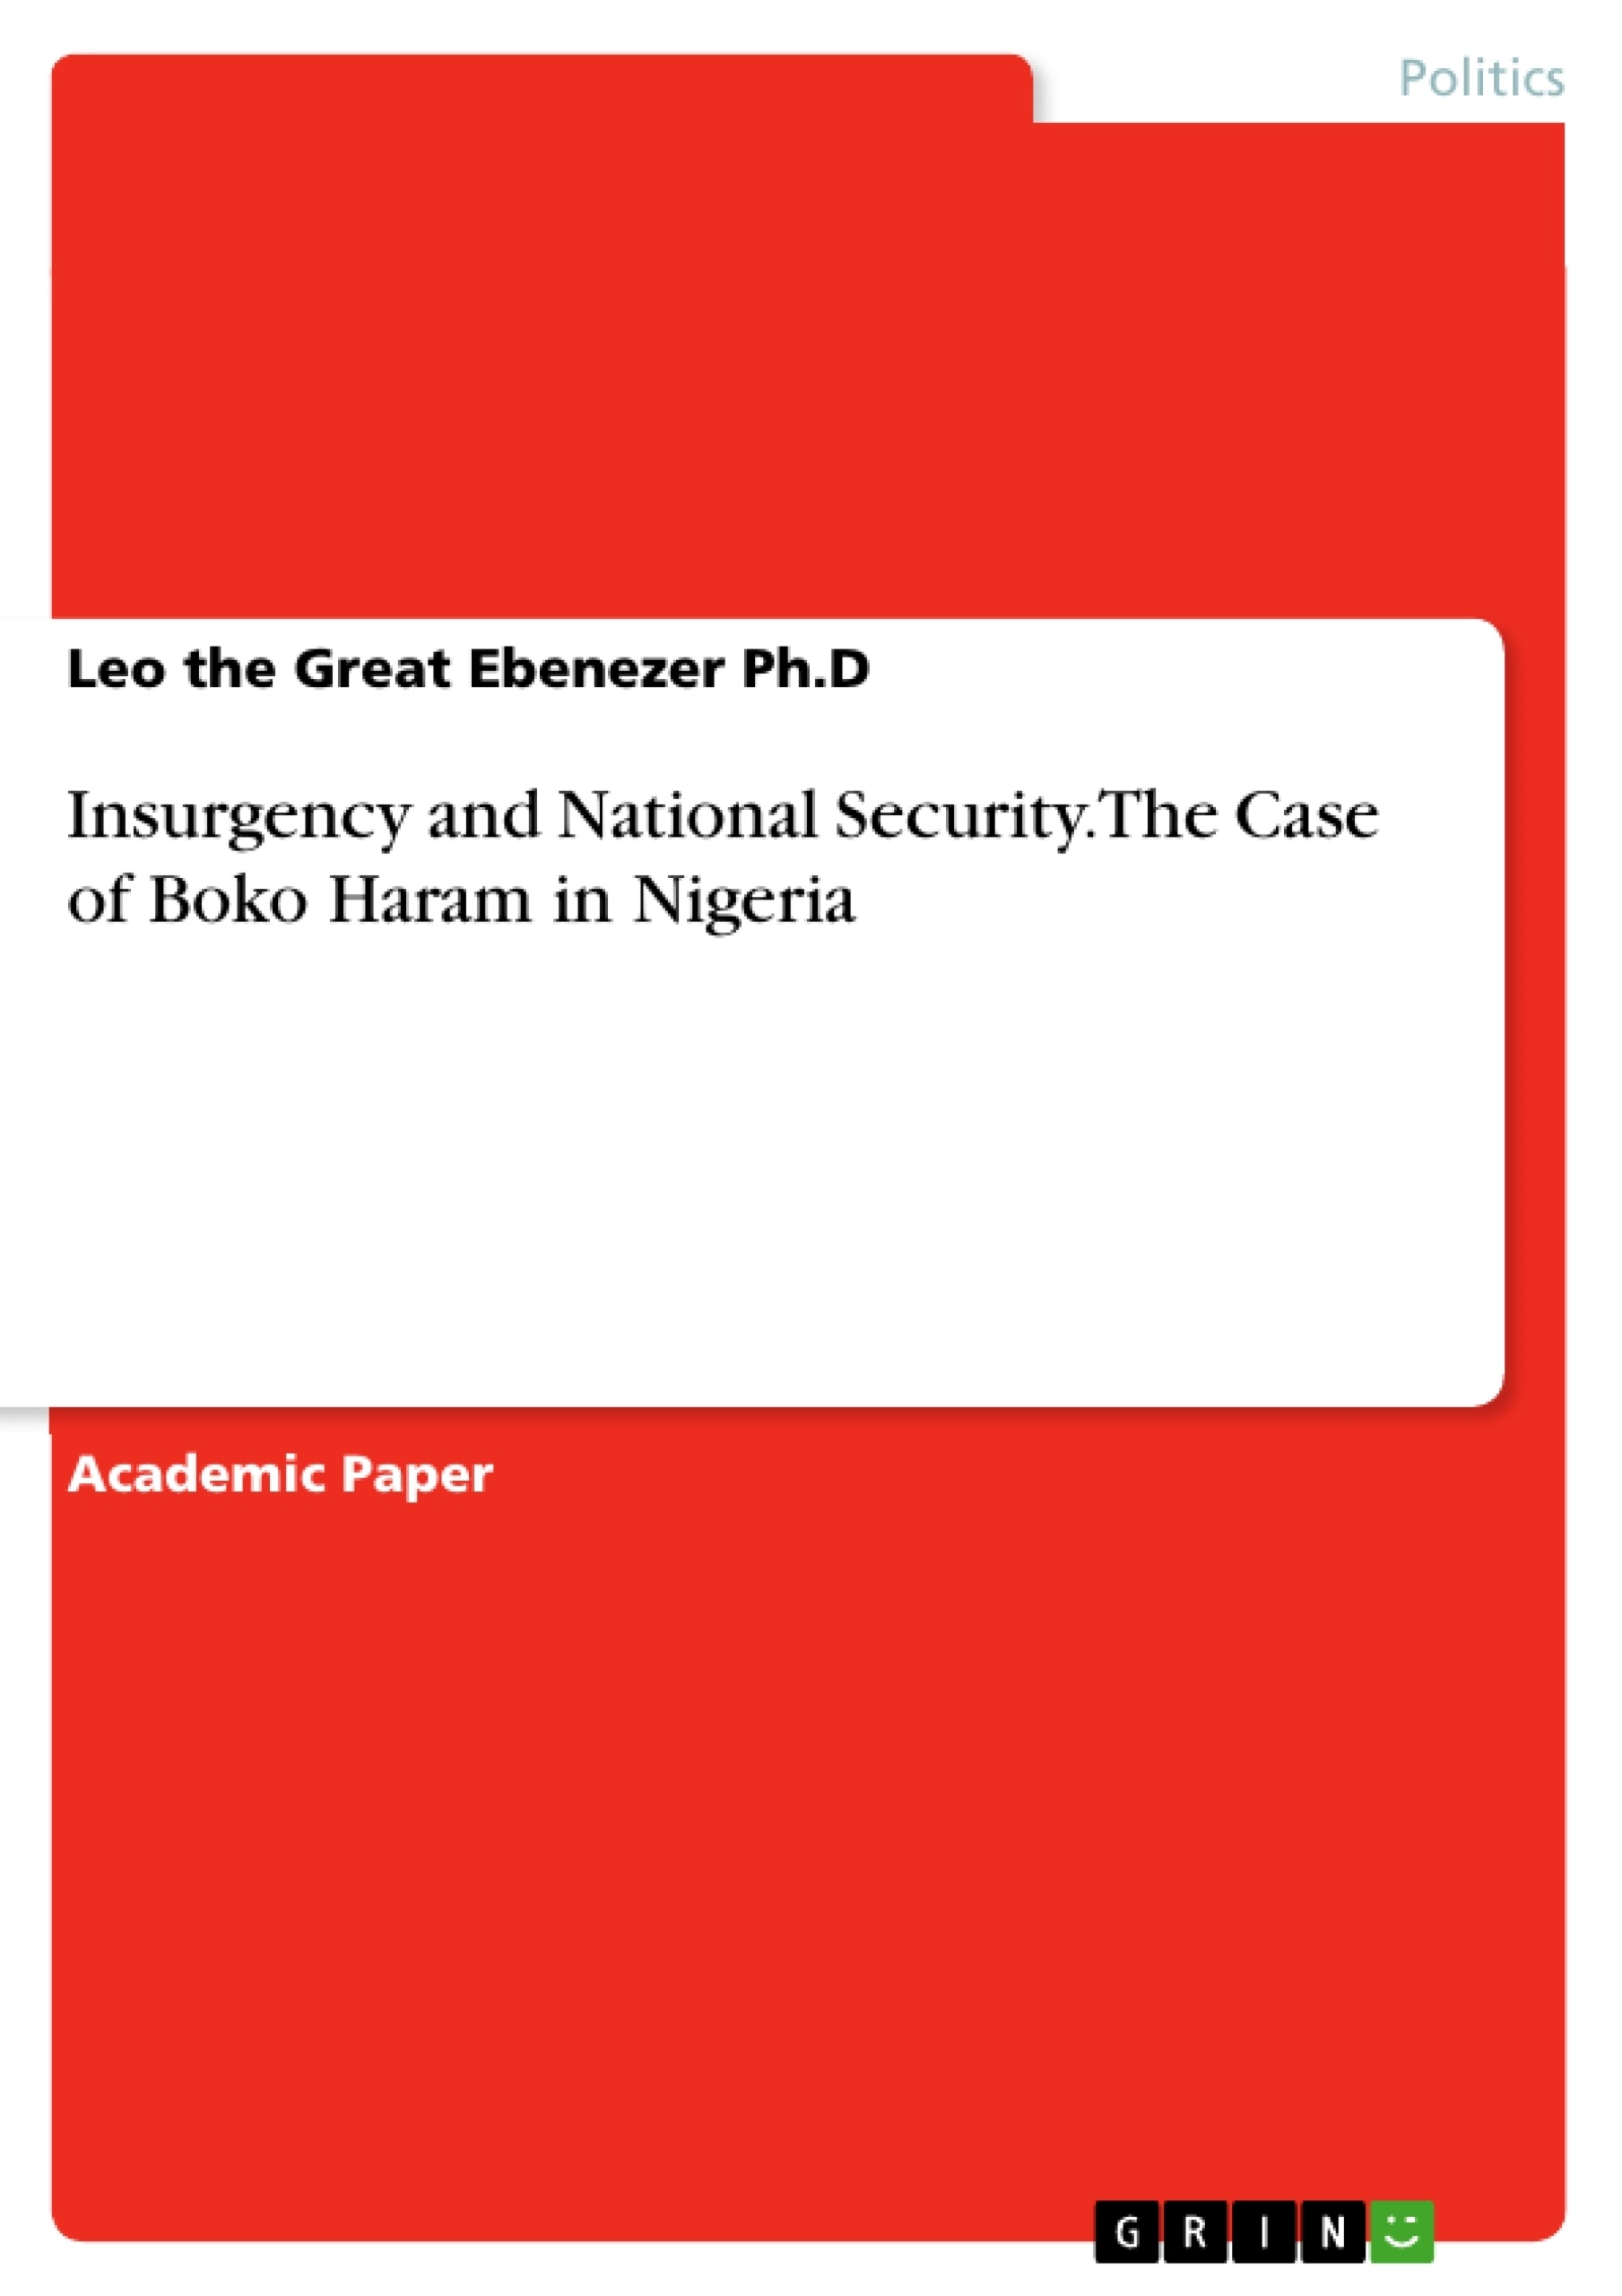 Title: Insurgency and National Security. The Case of Boko Haram in Nigeria